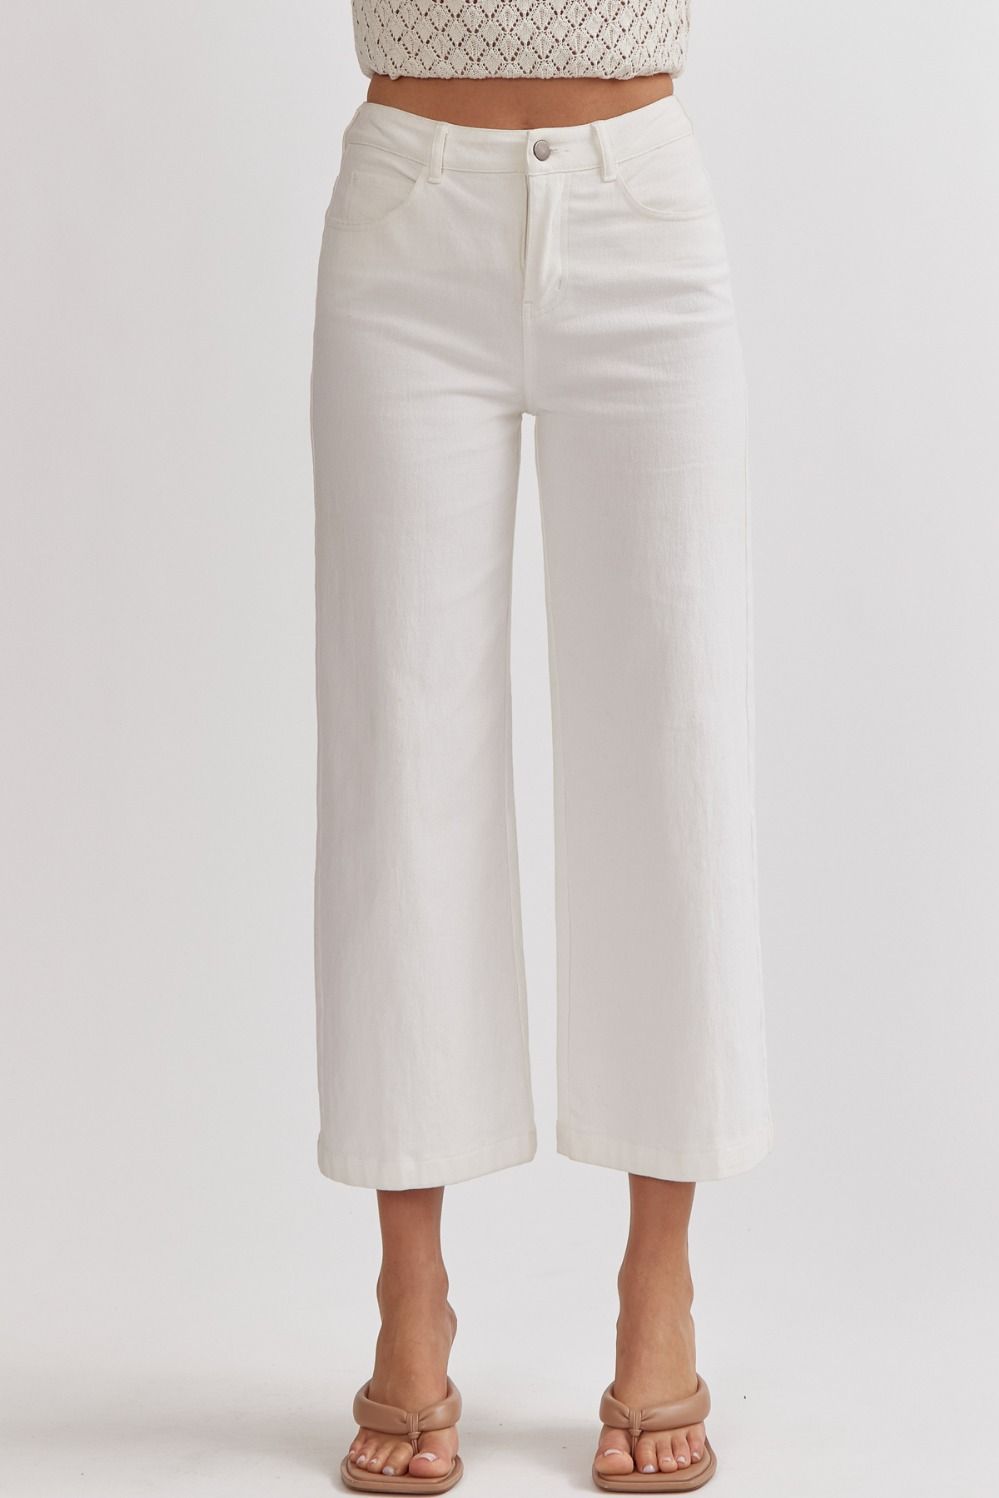 Evie Classic High Waisted Wide Leg Pant - White